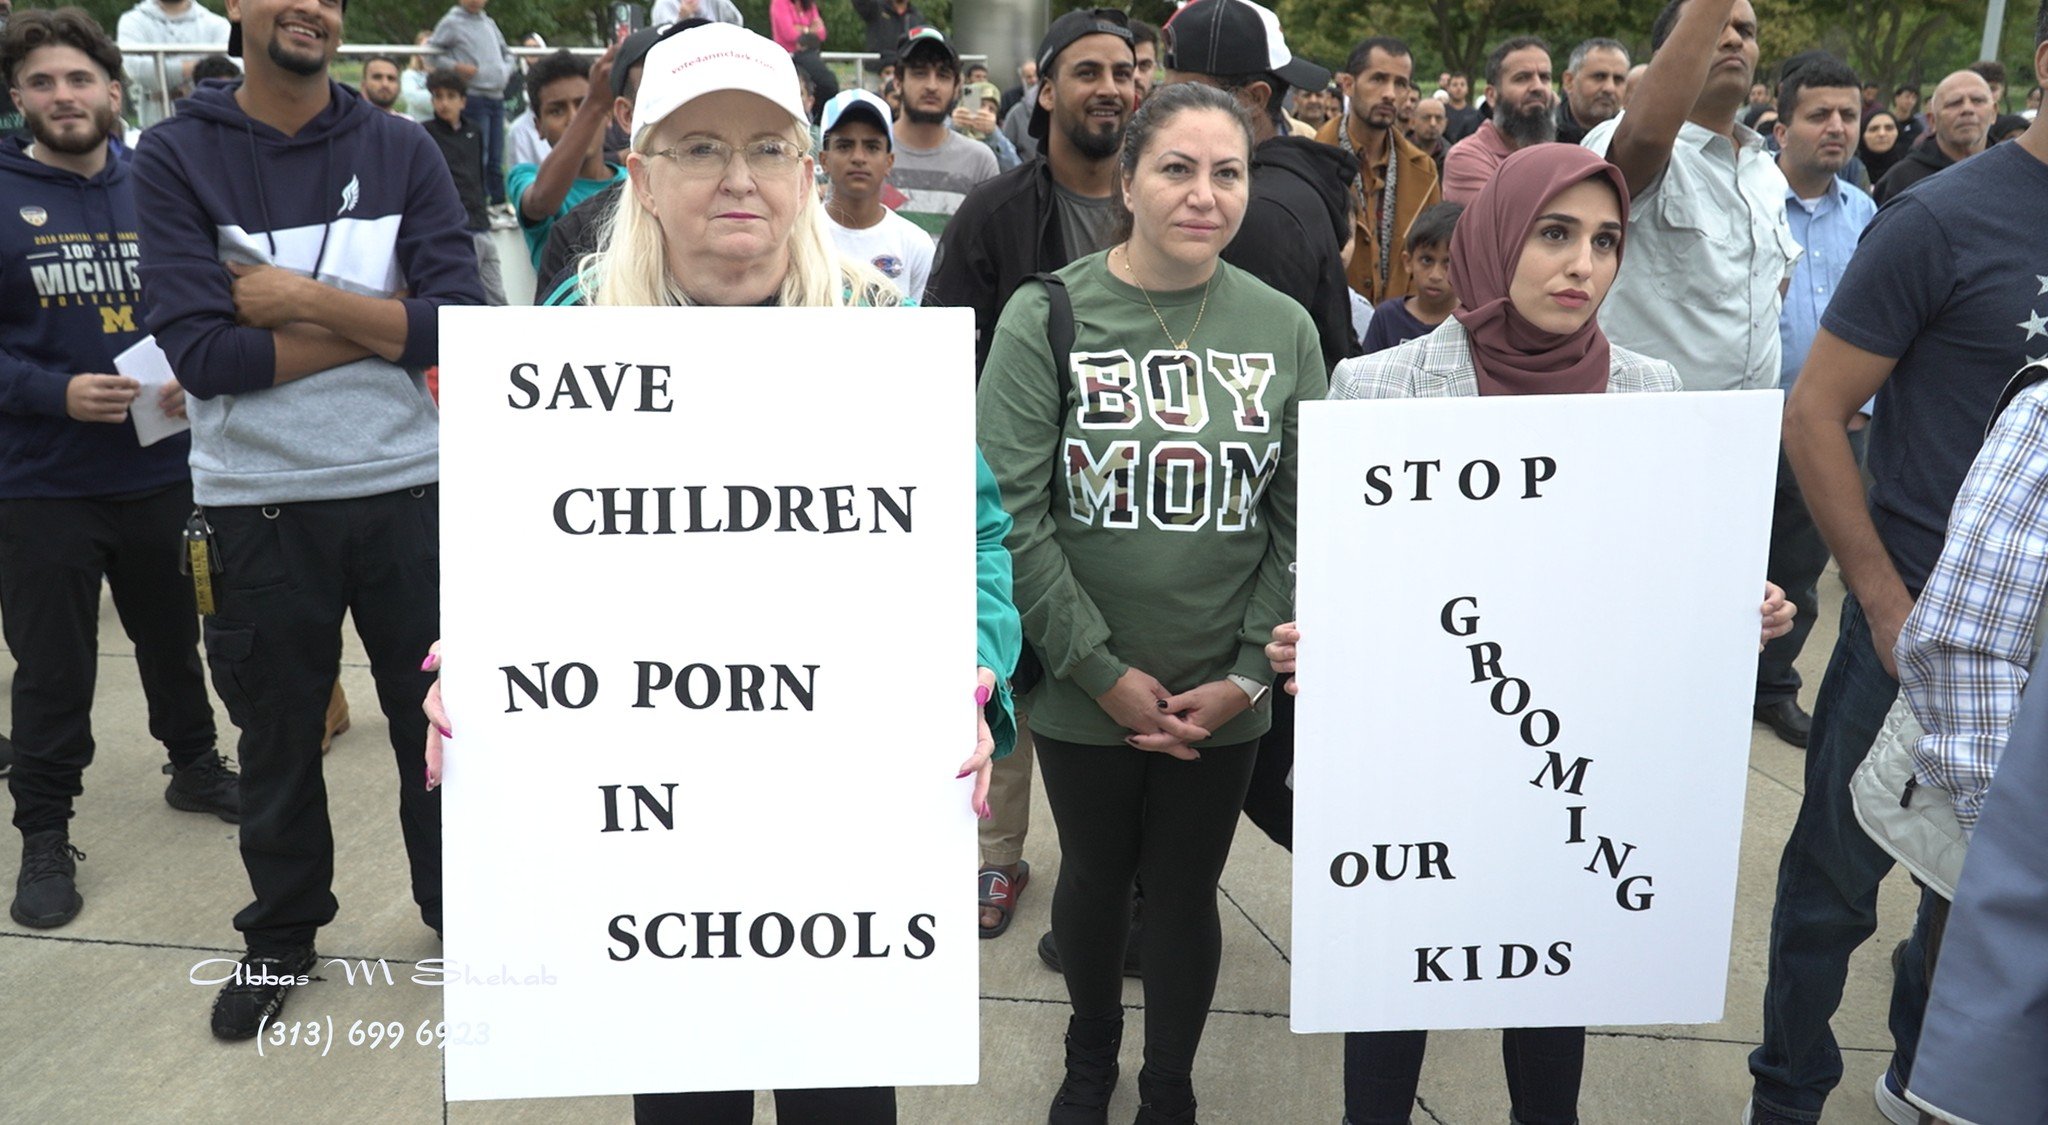 DEMONIC DEMS TAKE IT TOO FAR! Muslims, Christians and Jews UNITE To Demand Removal of Explicit Books From Dearborn, MI Public School Libraries [VIDEO]